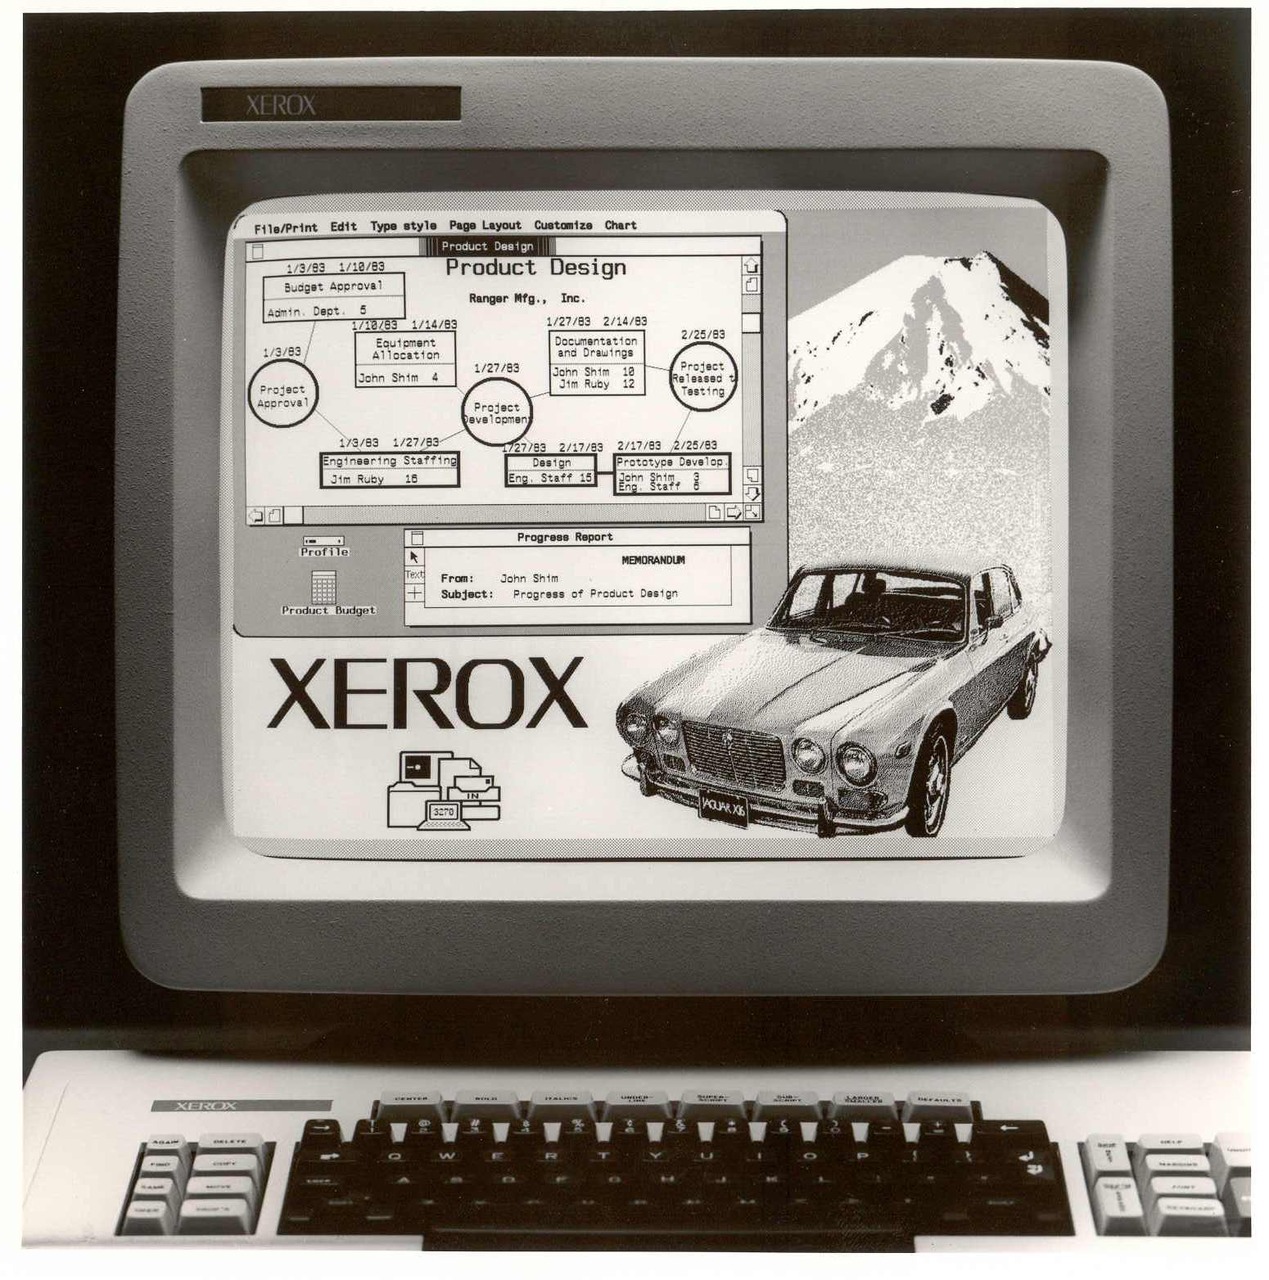 Xerox Star 8010 Interface, high quality polaroid (1981). Via www.digibarn.com. Image name: "xerox-star-8010-08.jpg" Licensed under a Creative Commons Attribution-Noncommercial 3.0 License.